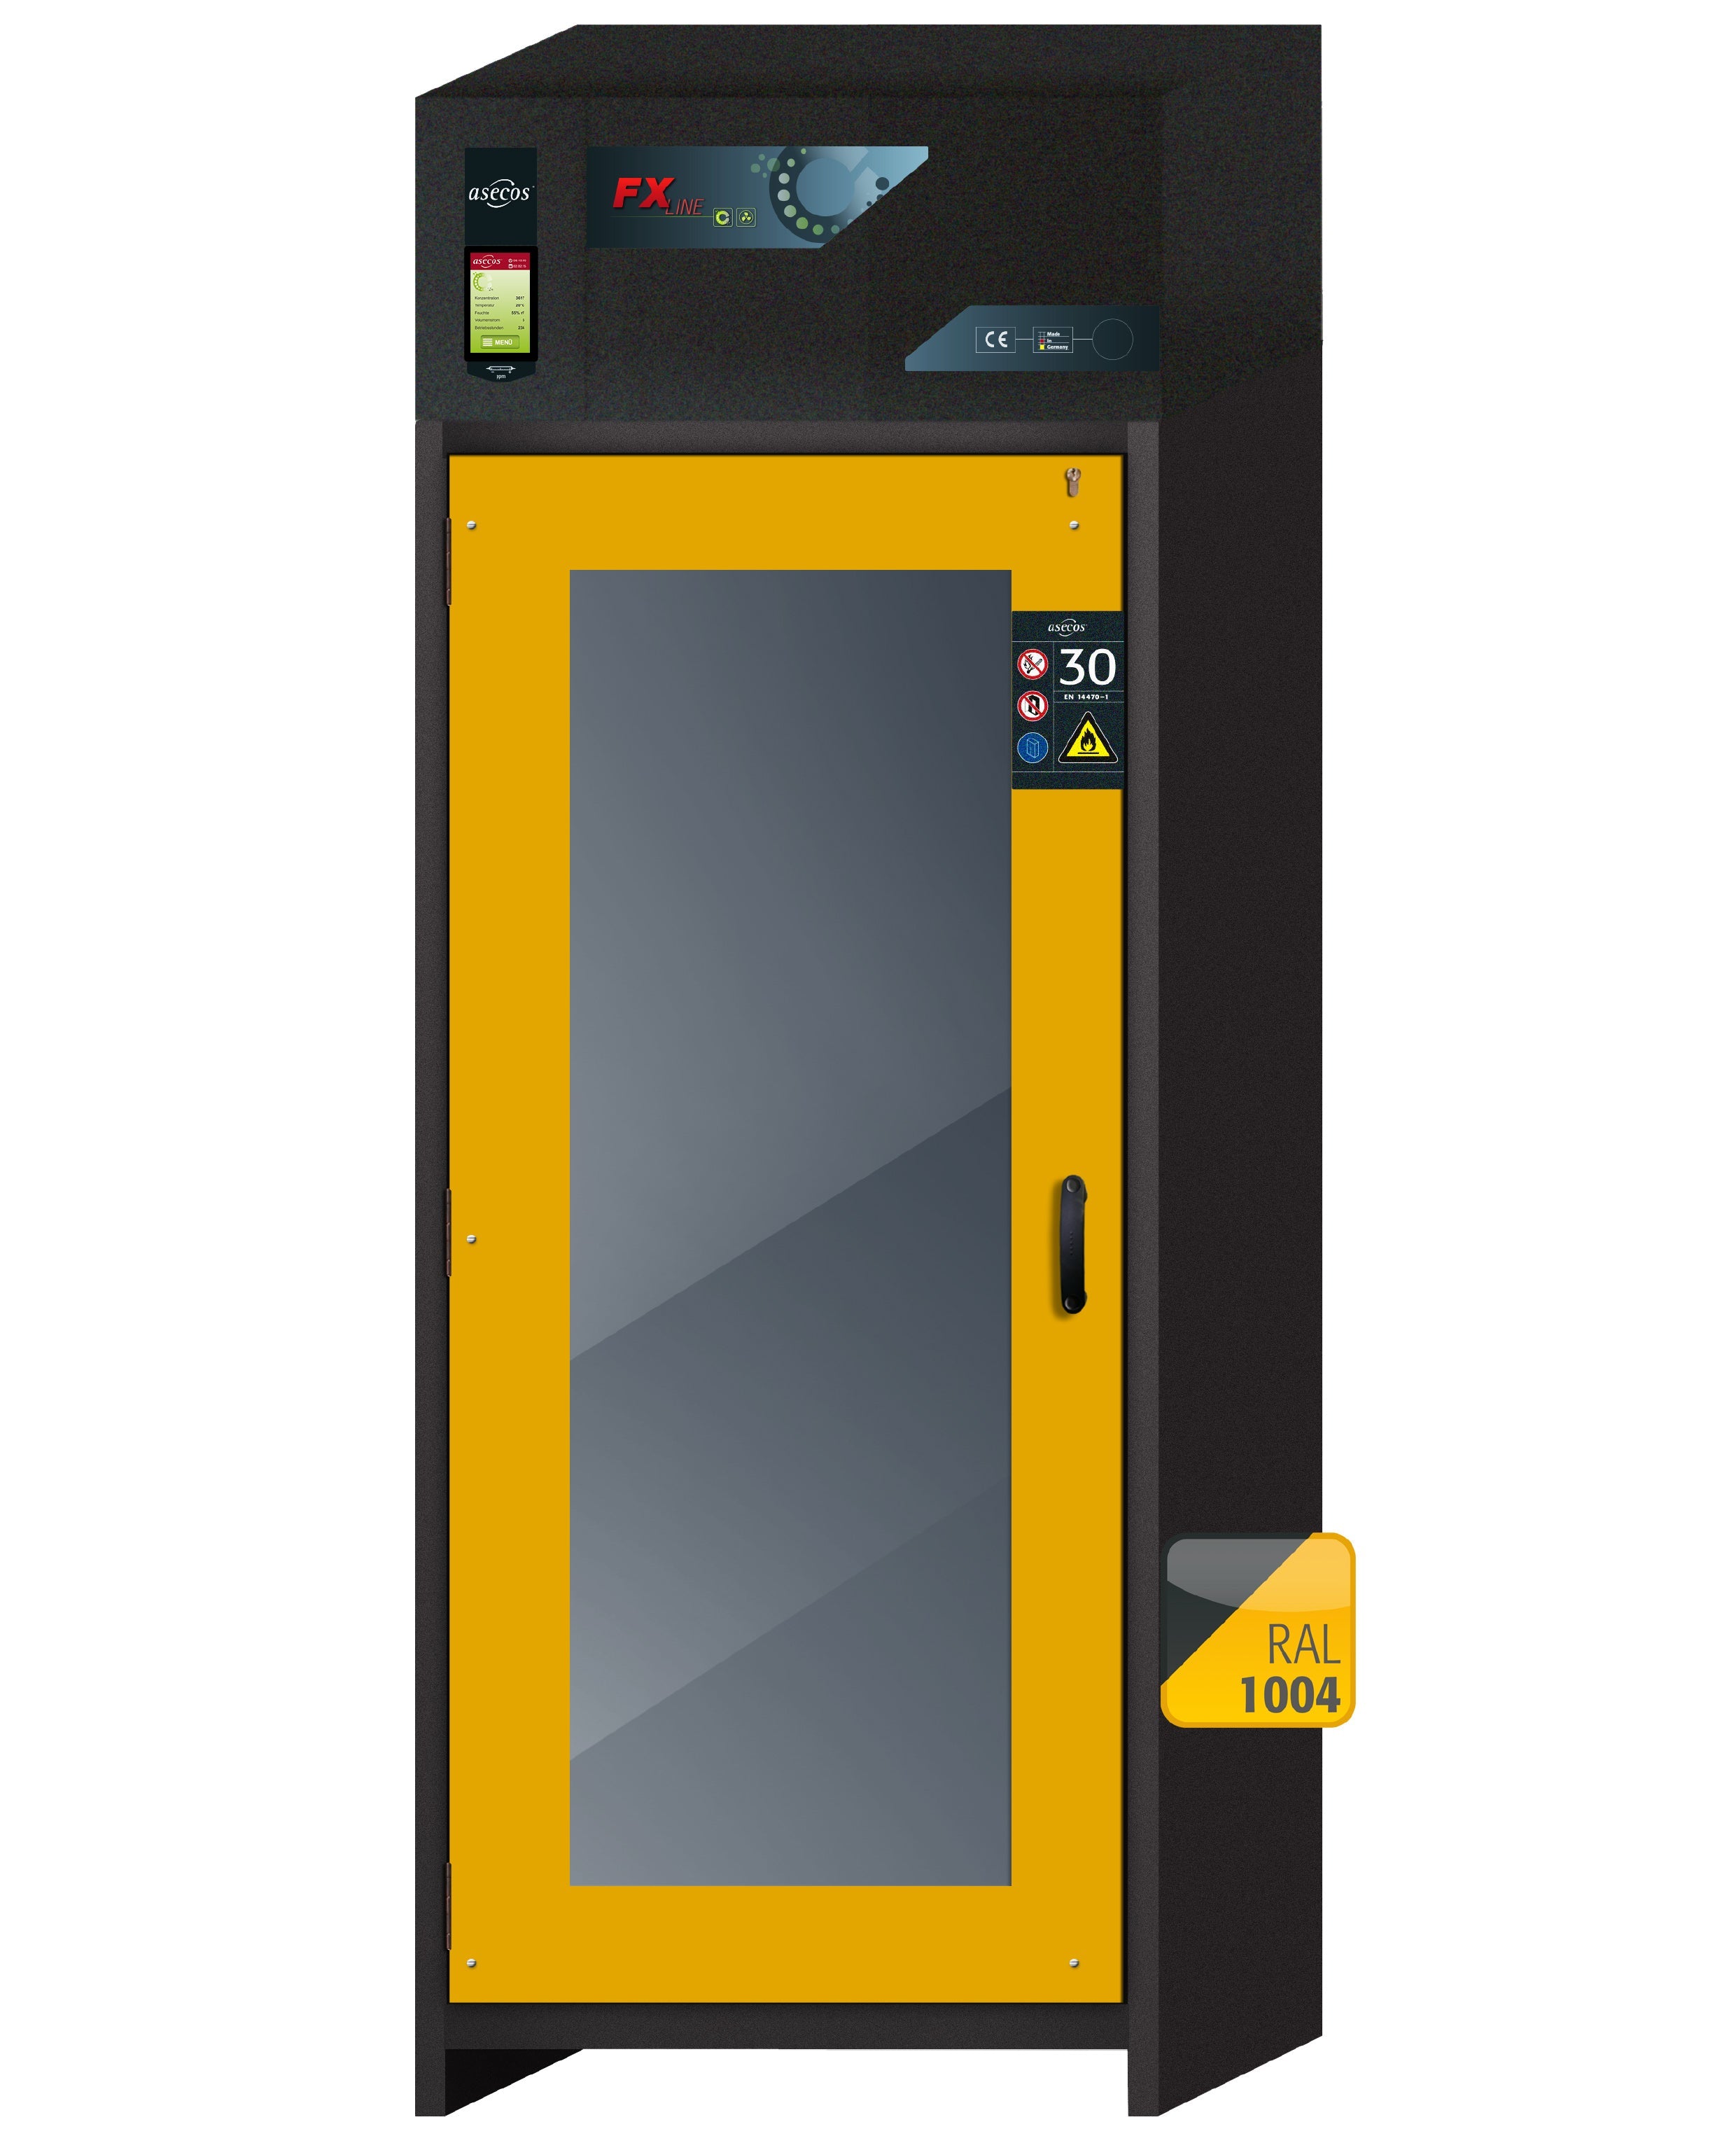 Type 30 circulating air filter cabinet FX-DISPLAY-30 model FX30.229.086.WDFW in safety yellow RAL 1004 with 3x standard tray base (polypropylene)